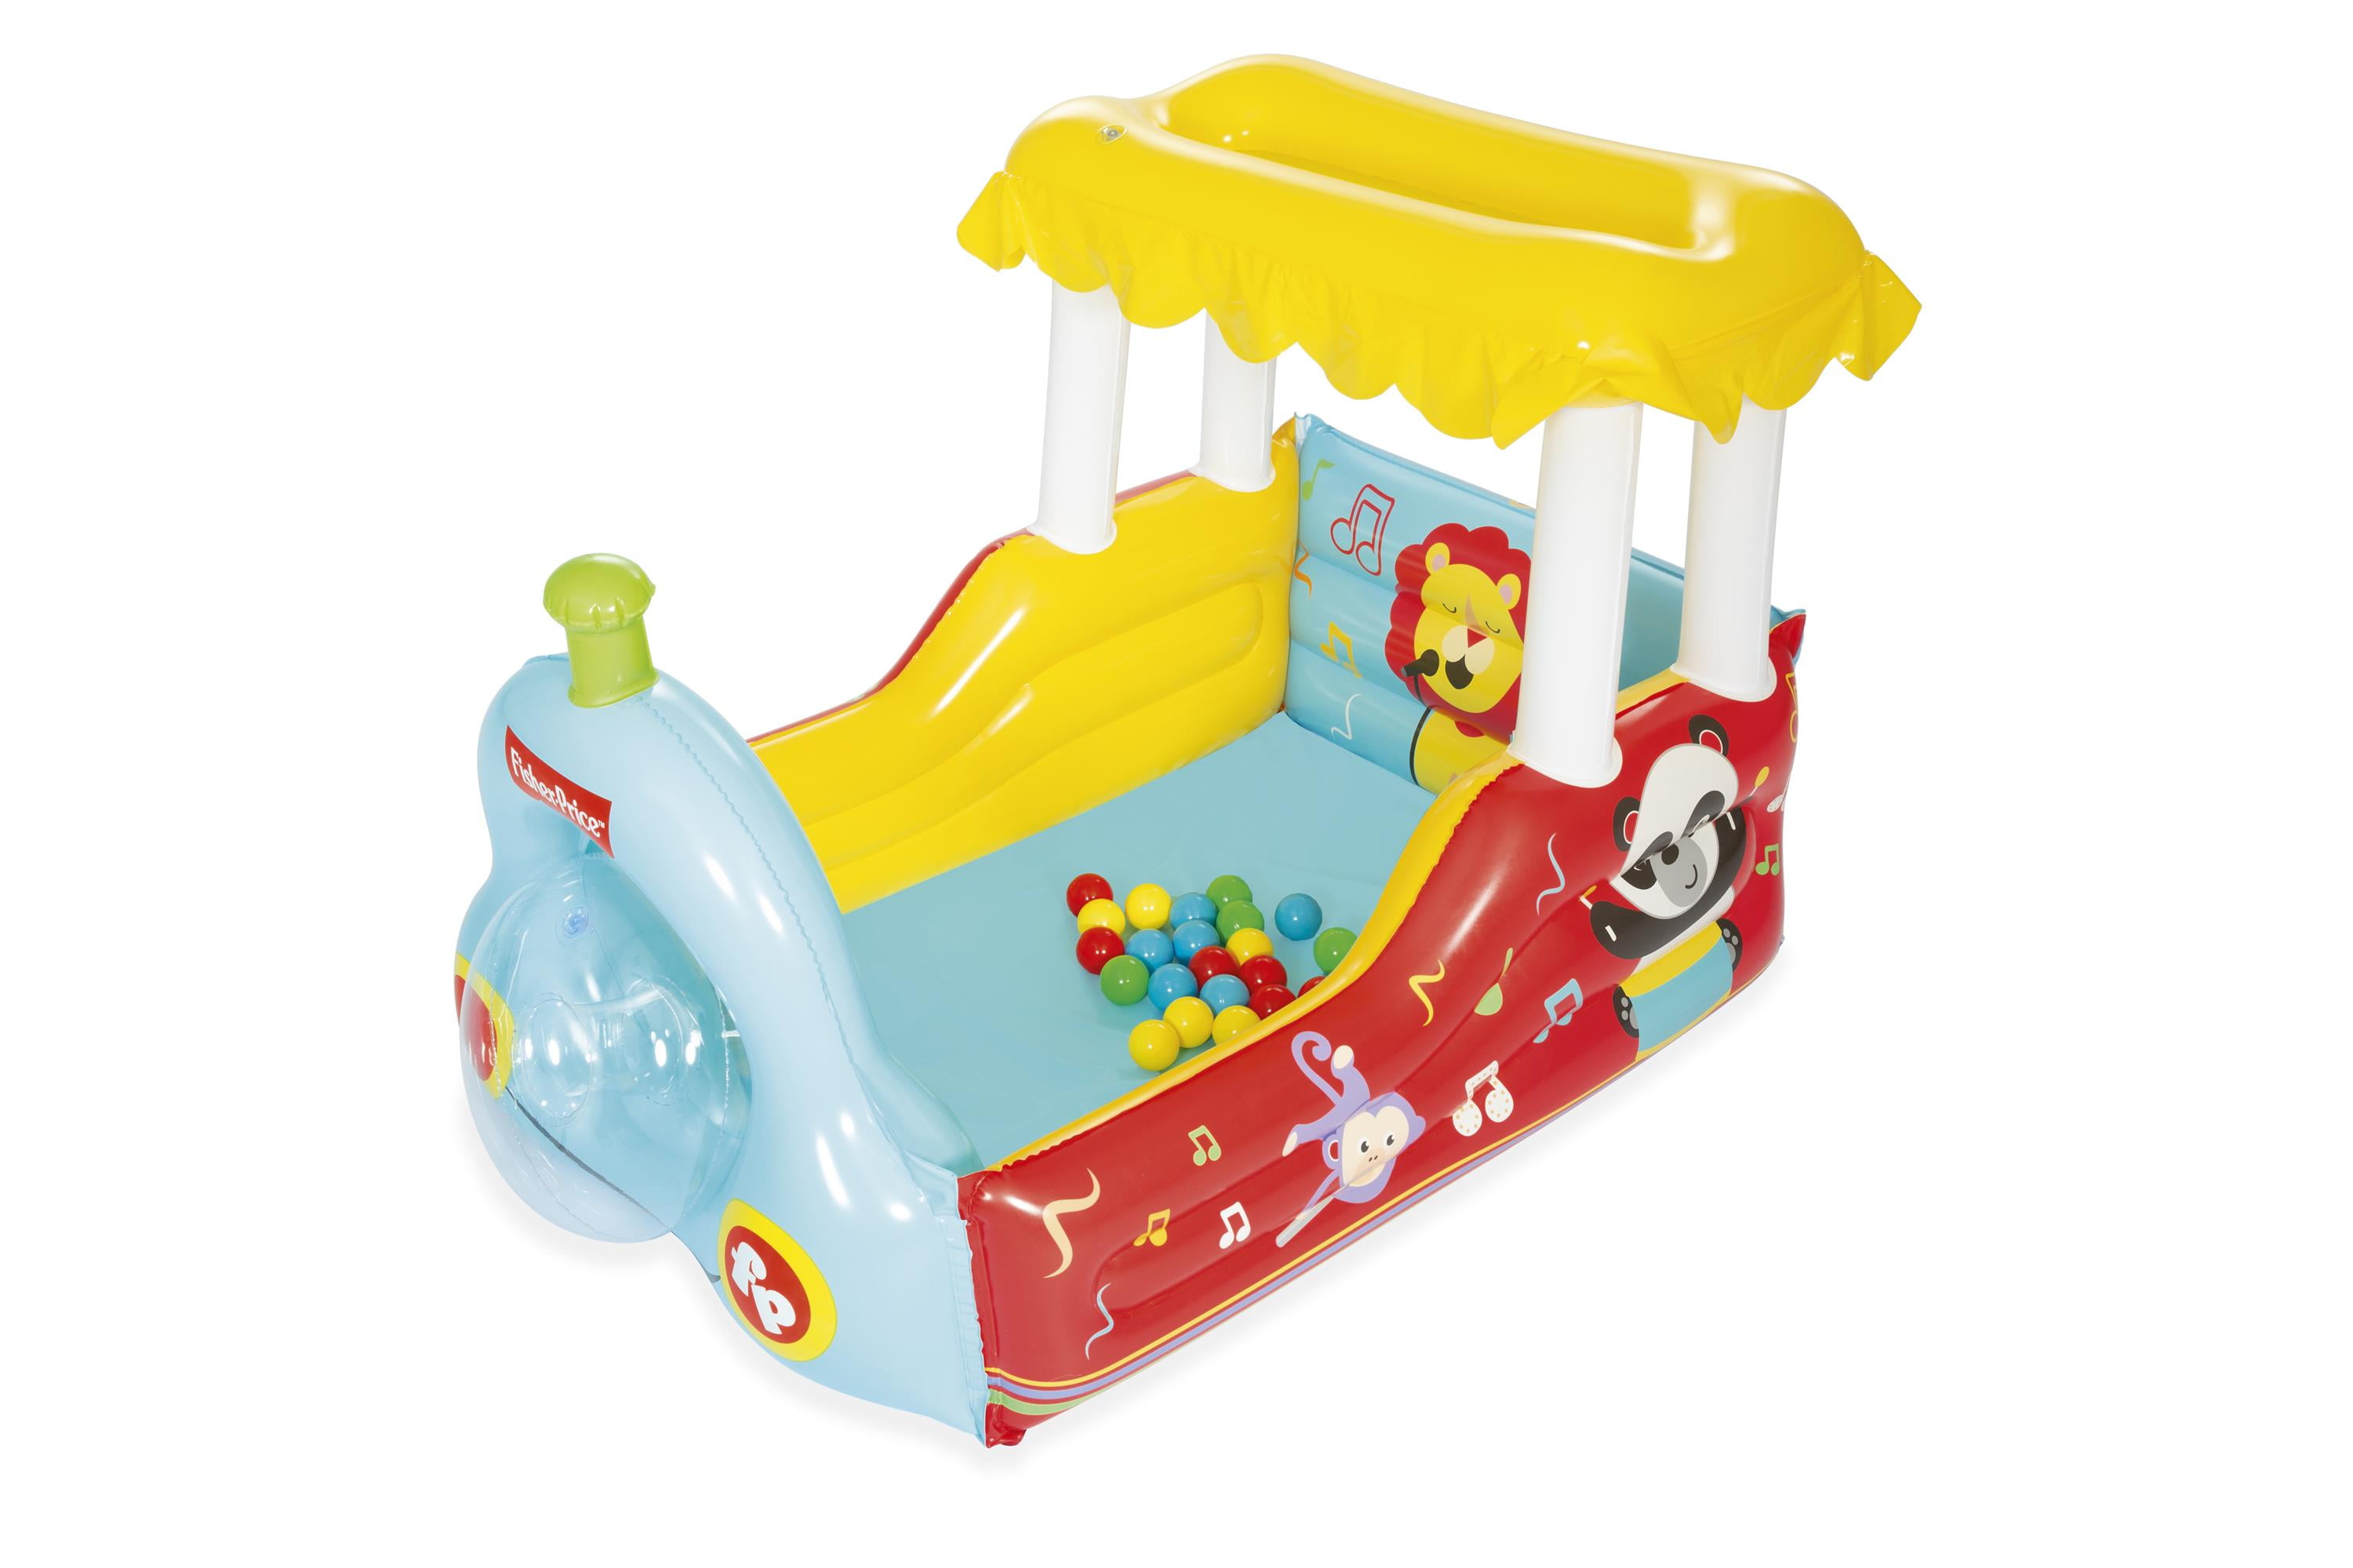 FisherPrice Train Ball Pit with 25 MultiColored Play